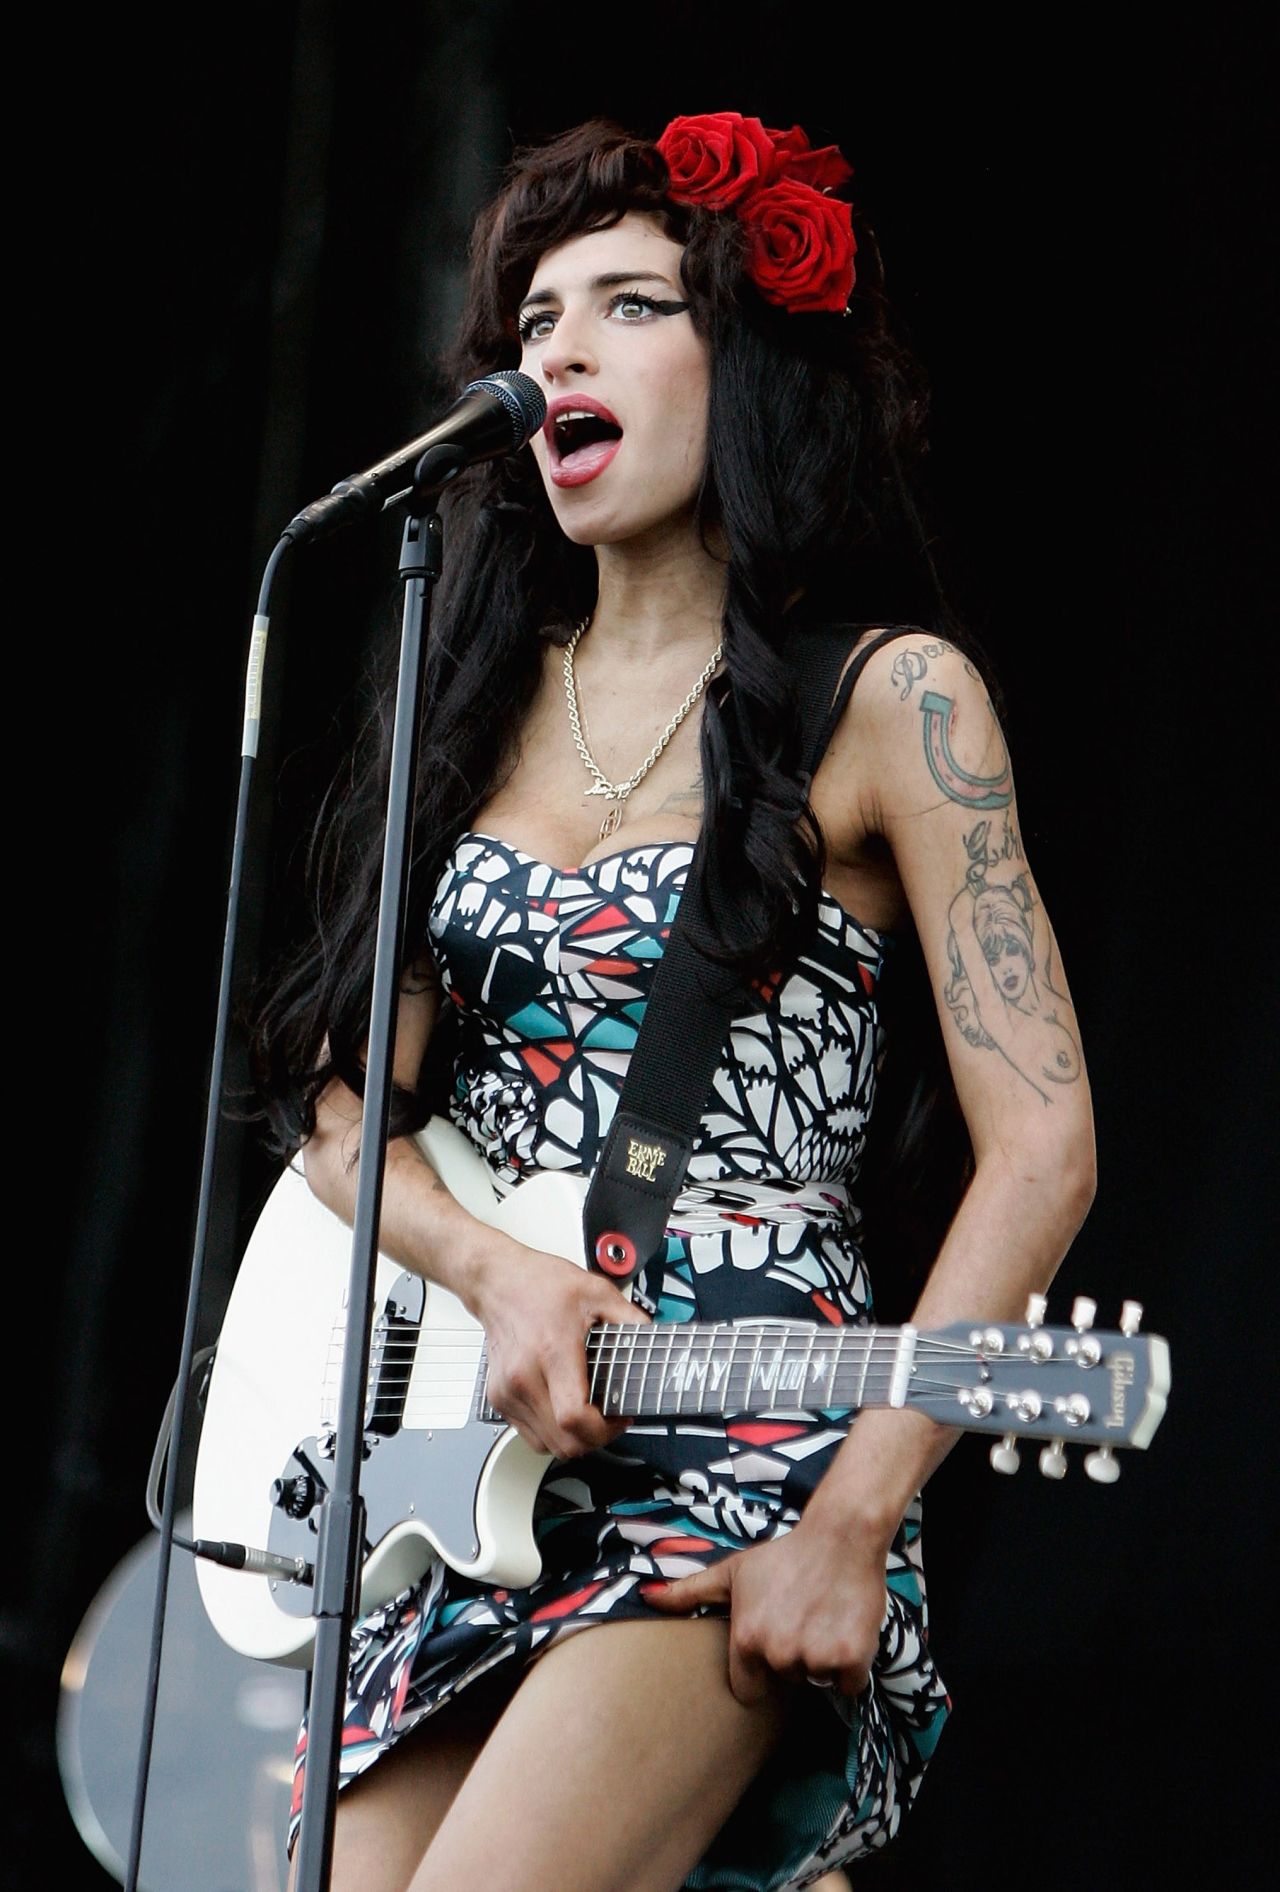 Singer Amy Winehouse was found dead July 23 in her London apartment. The 27-year-old performer infamous for her arrests and substance abuse problems died of alcohol poisoning. <a href="http://articles.cnn.com/2011-07-23/entertainment/amy.winehouse.dies_1_drug-overdoses-winehouse-spokesman-chris-goodman-singer-amy-winehouse?_s=PM:SHOWBIZ">Full story</a>